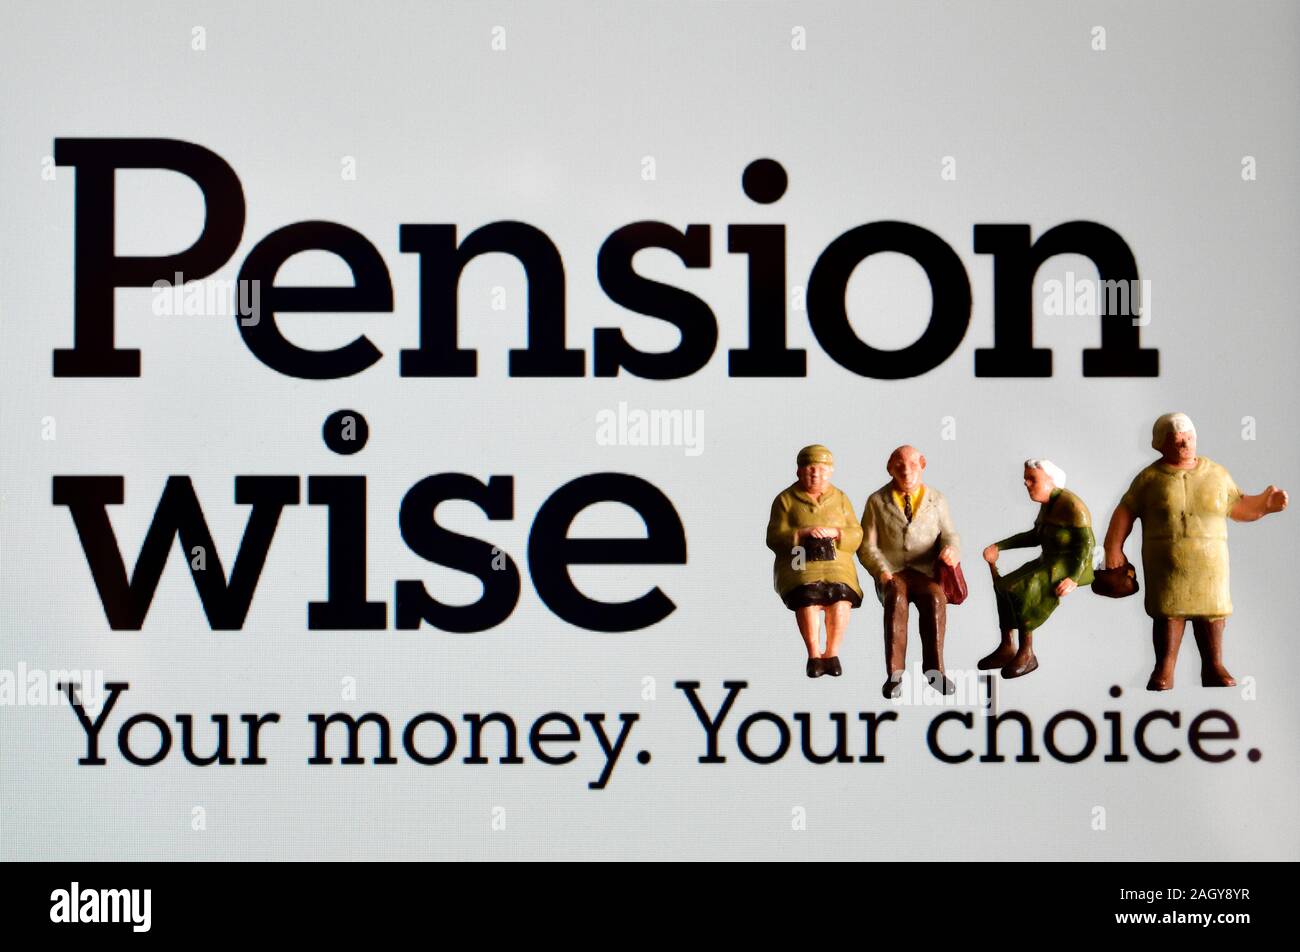 Pension wise government advice website with miniature figurines Stock Photo